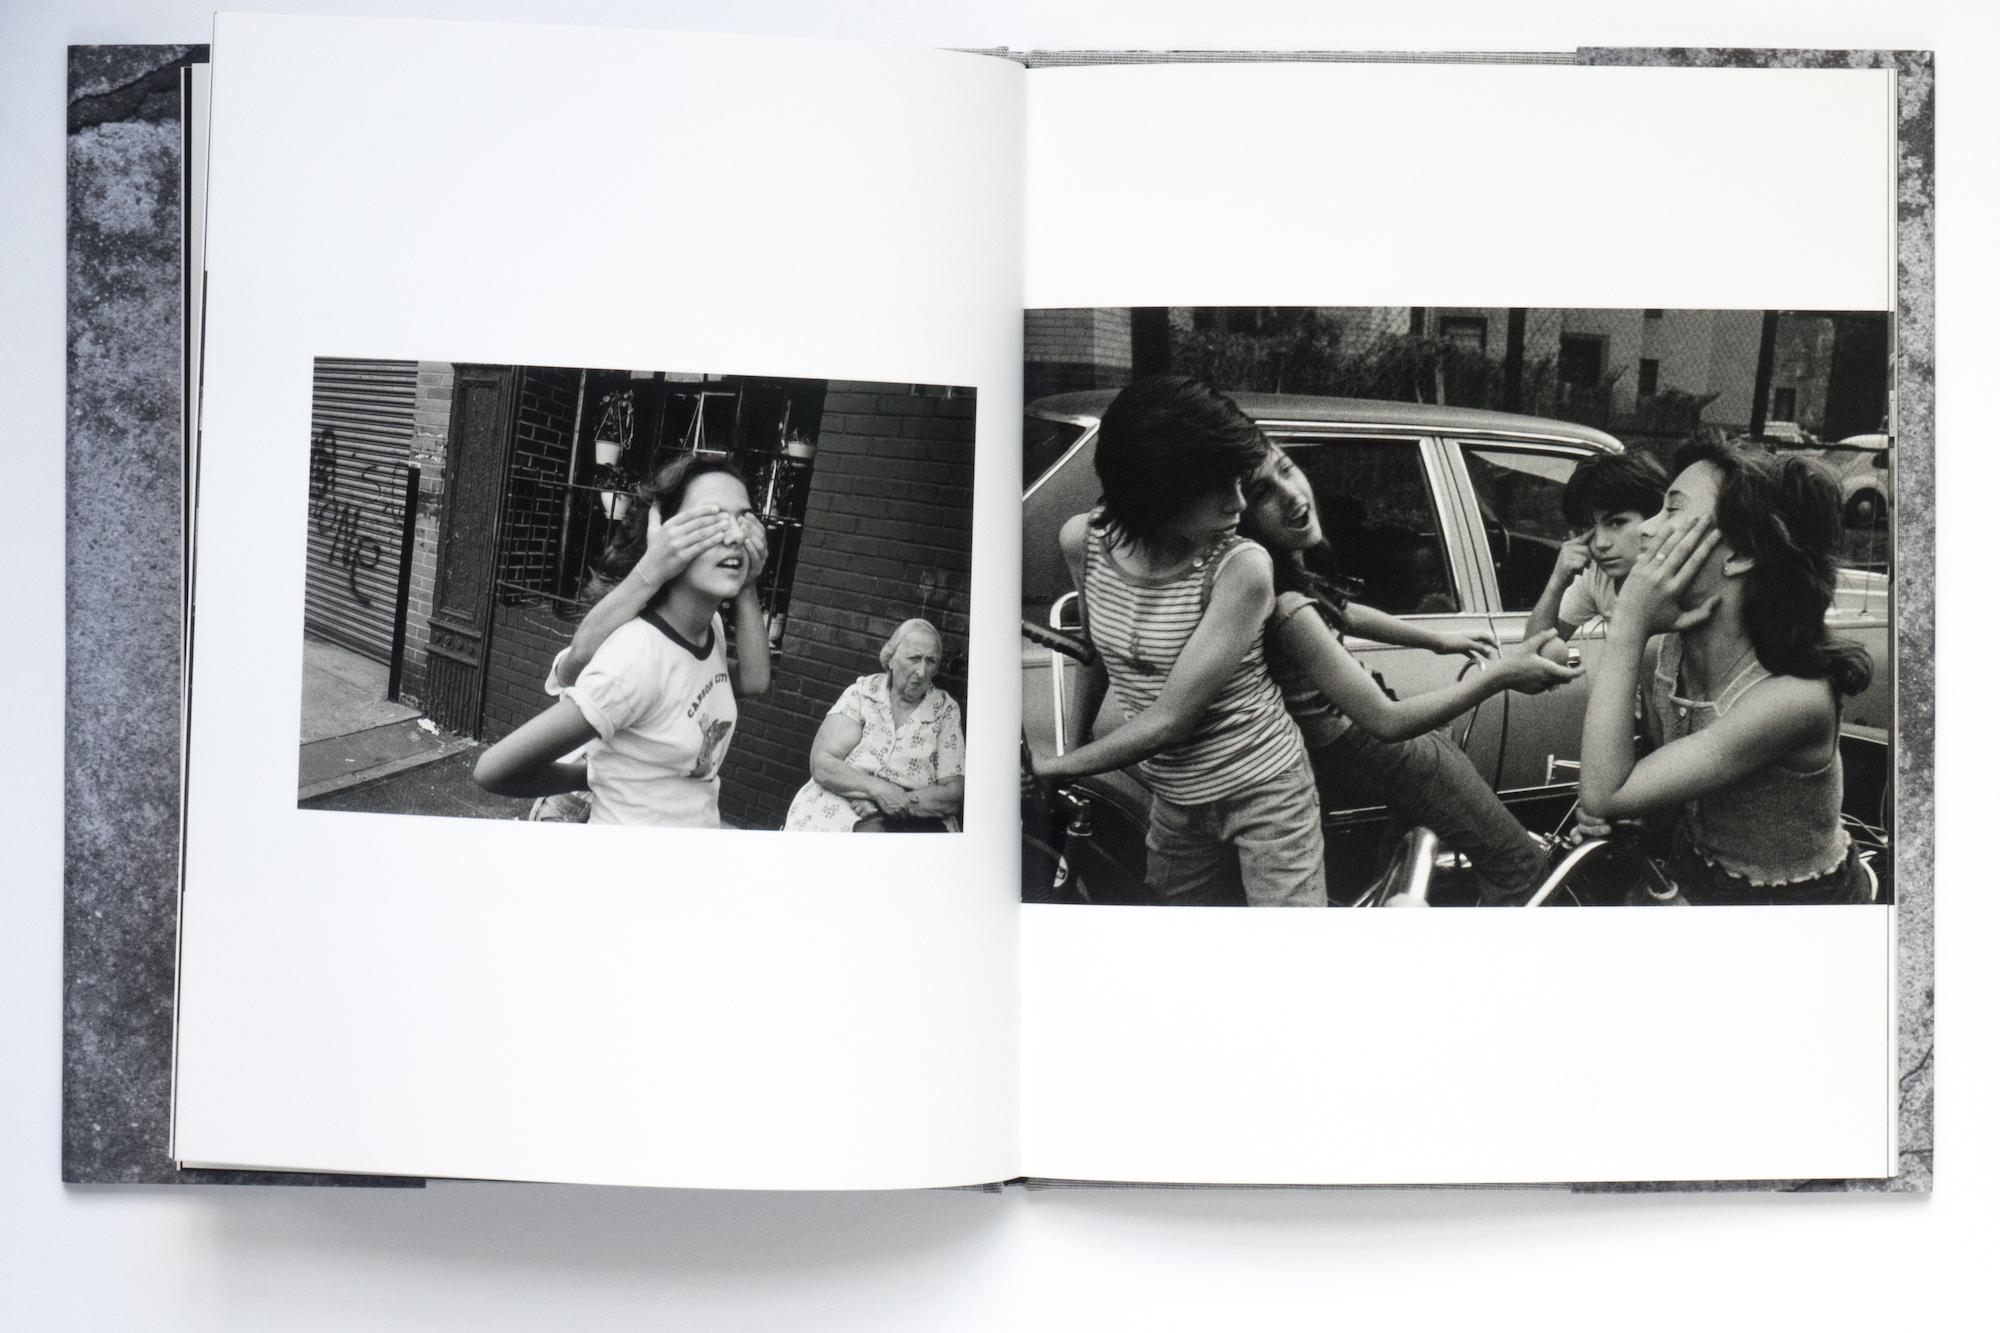 Prince Street Girls Books - Spread from Prince Street Girls book published by TBW, 2017